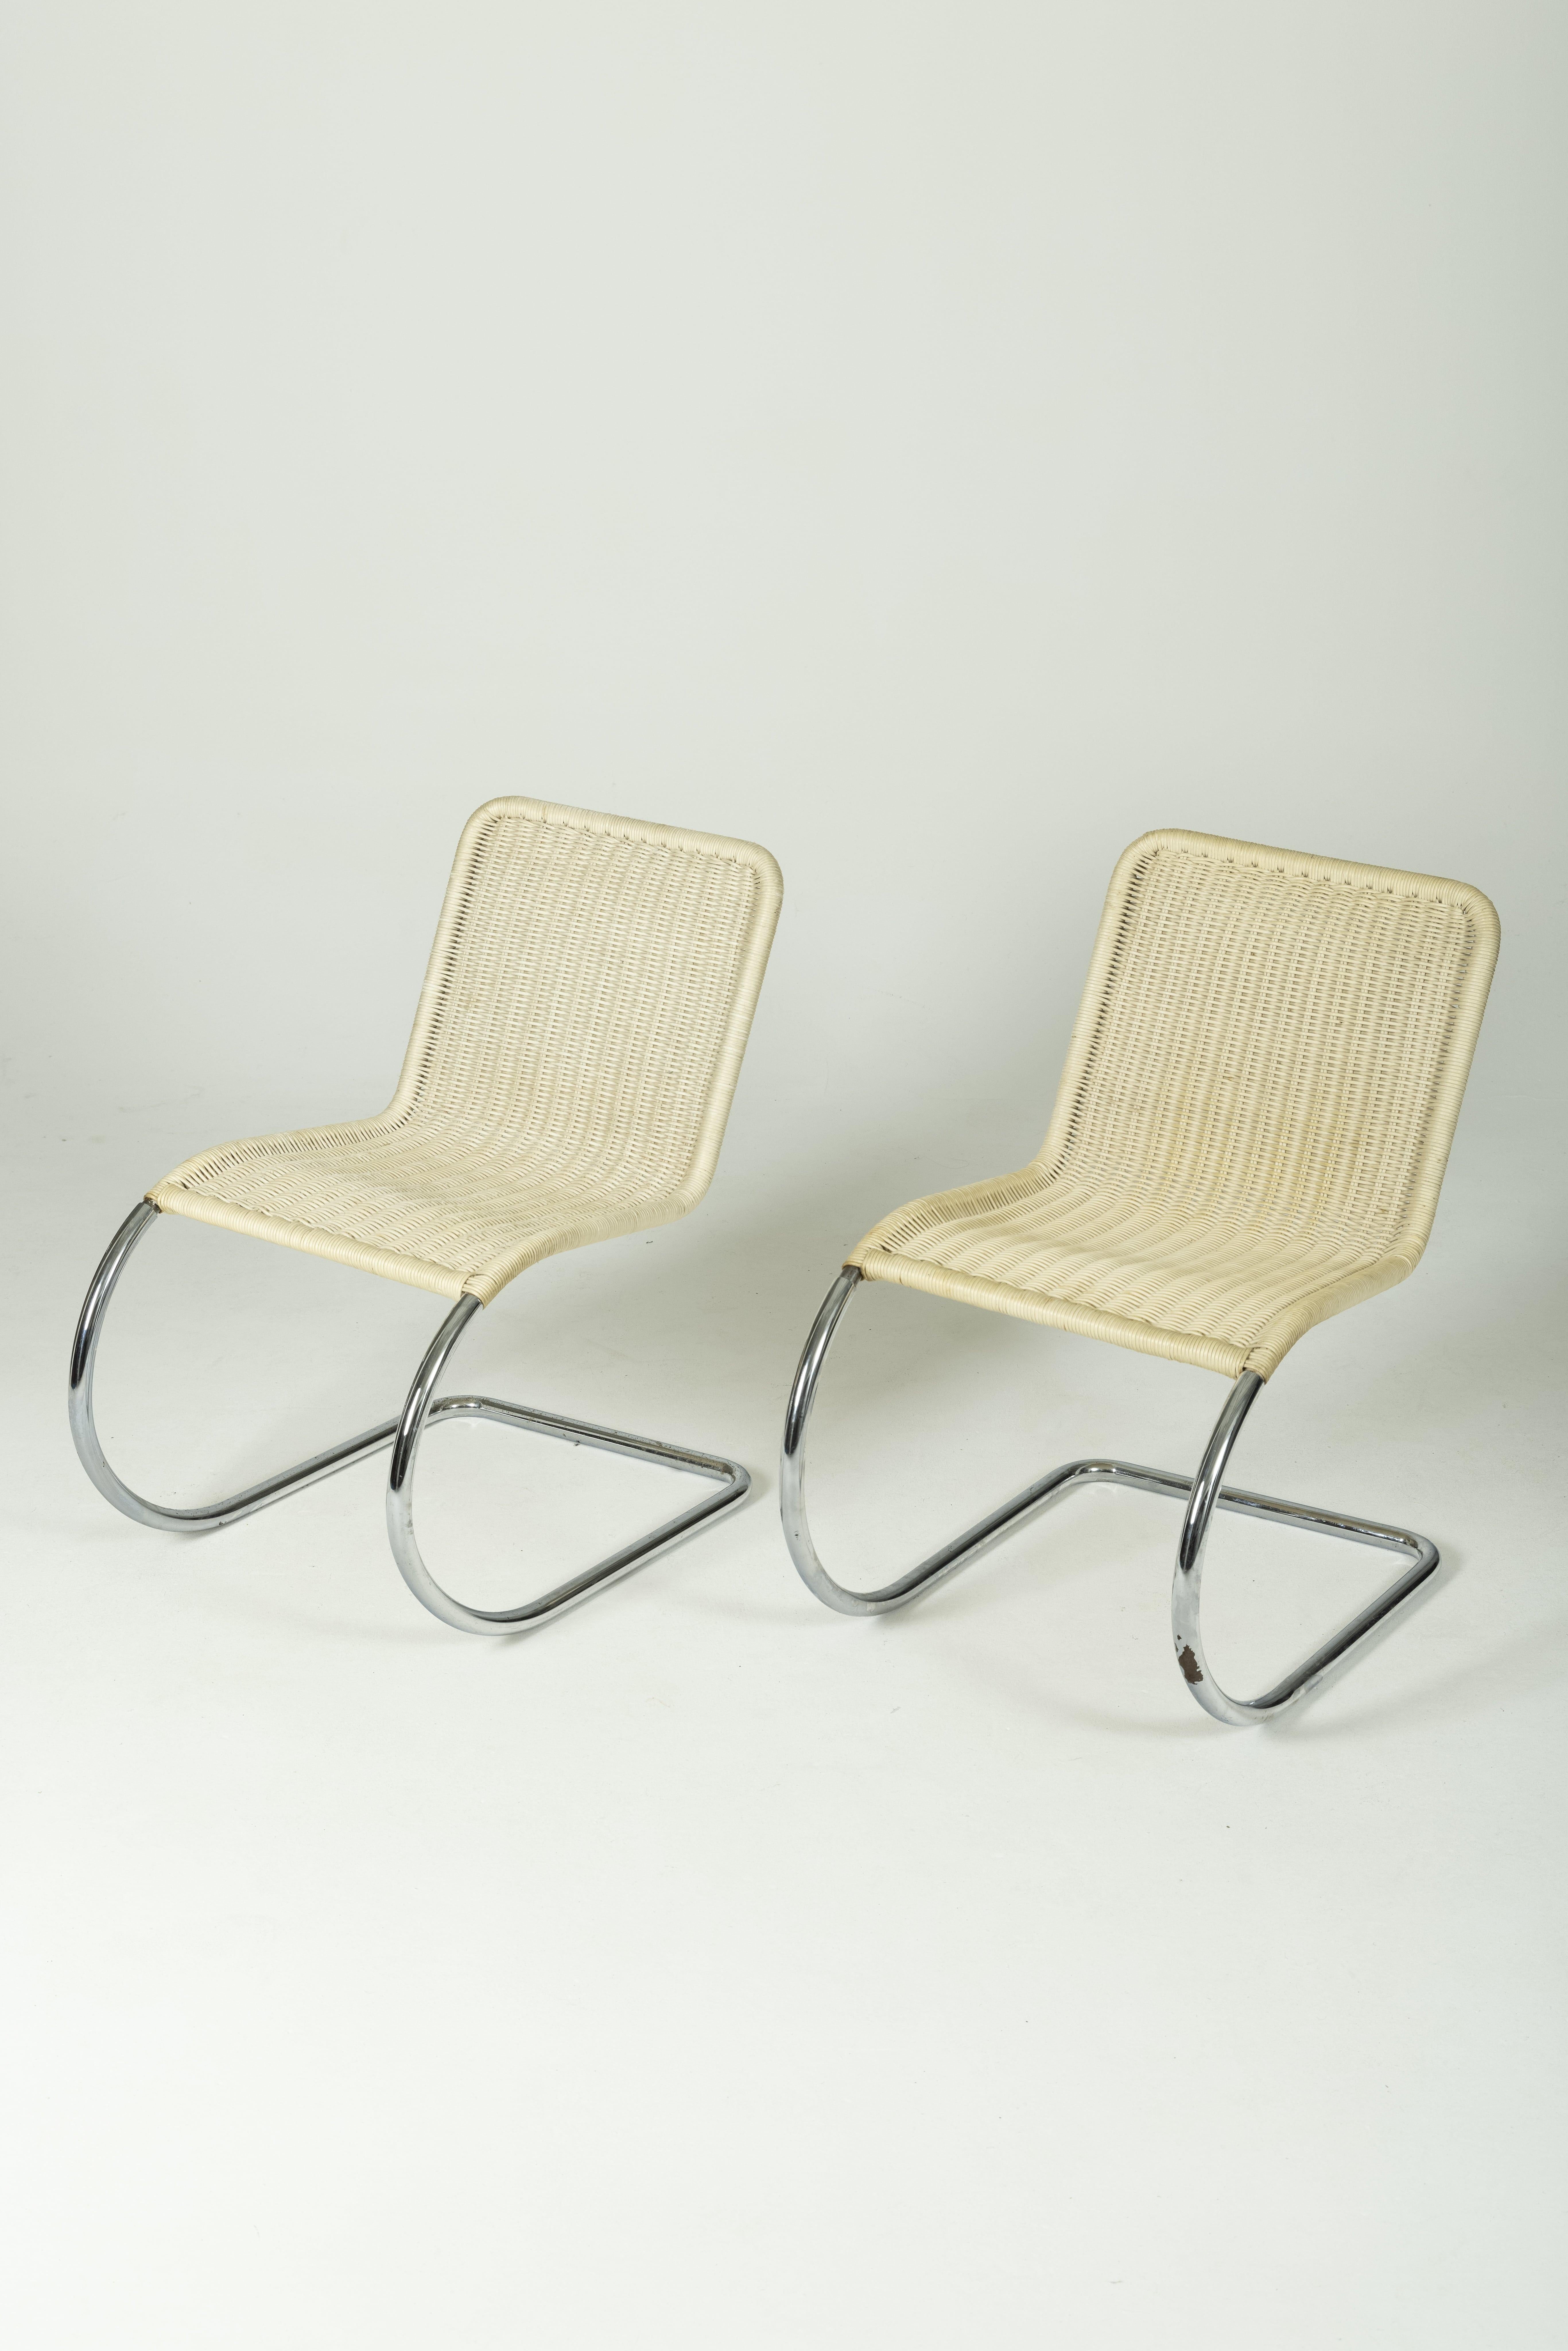 MR10 chair by designer Ludwig Mies Van der Rohe, from the 1930s. Cantilevered flexible frame, chrome steel tube, and beige cane seat. Slight signs of wear. Two chairs available.
LP875-876